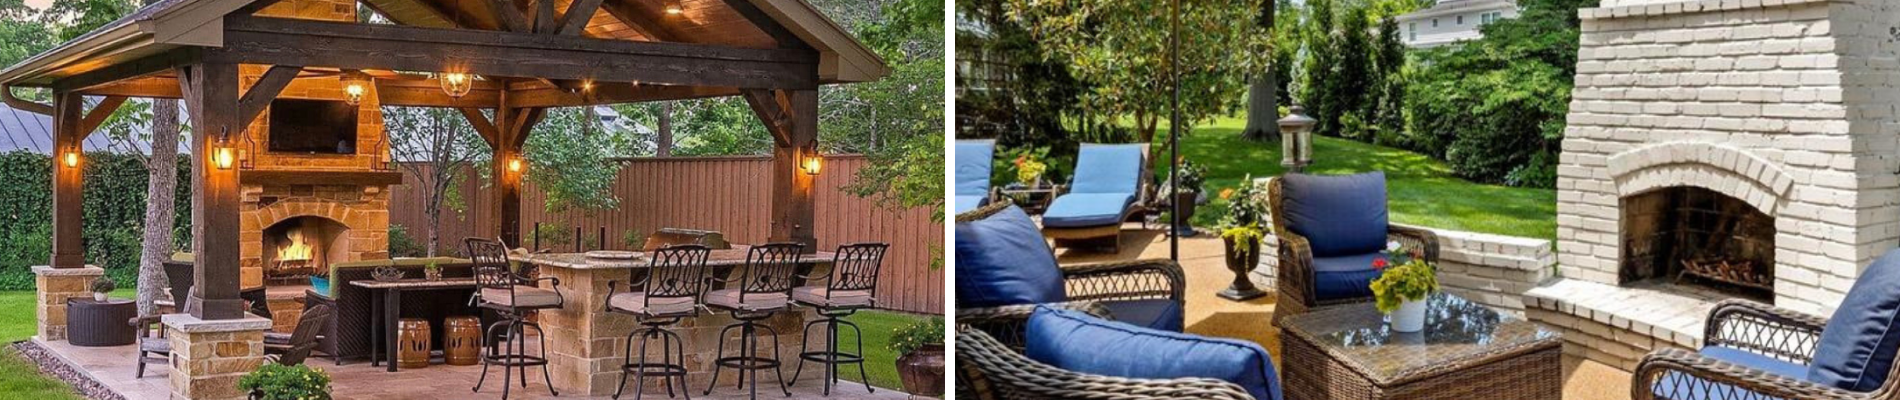 Elevating Outdoor Spaces: The Latest Design Trends in Real Estate